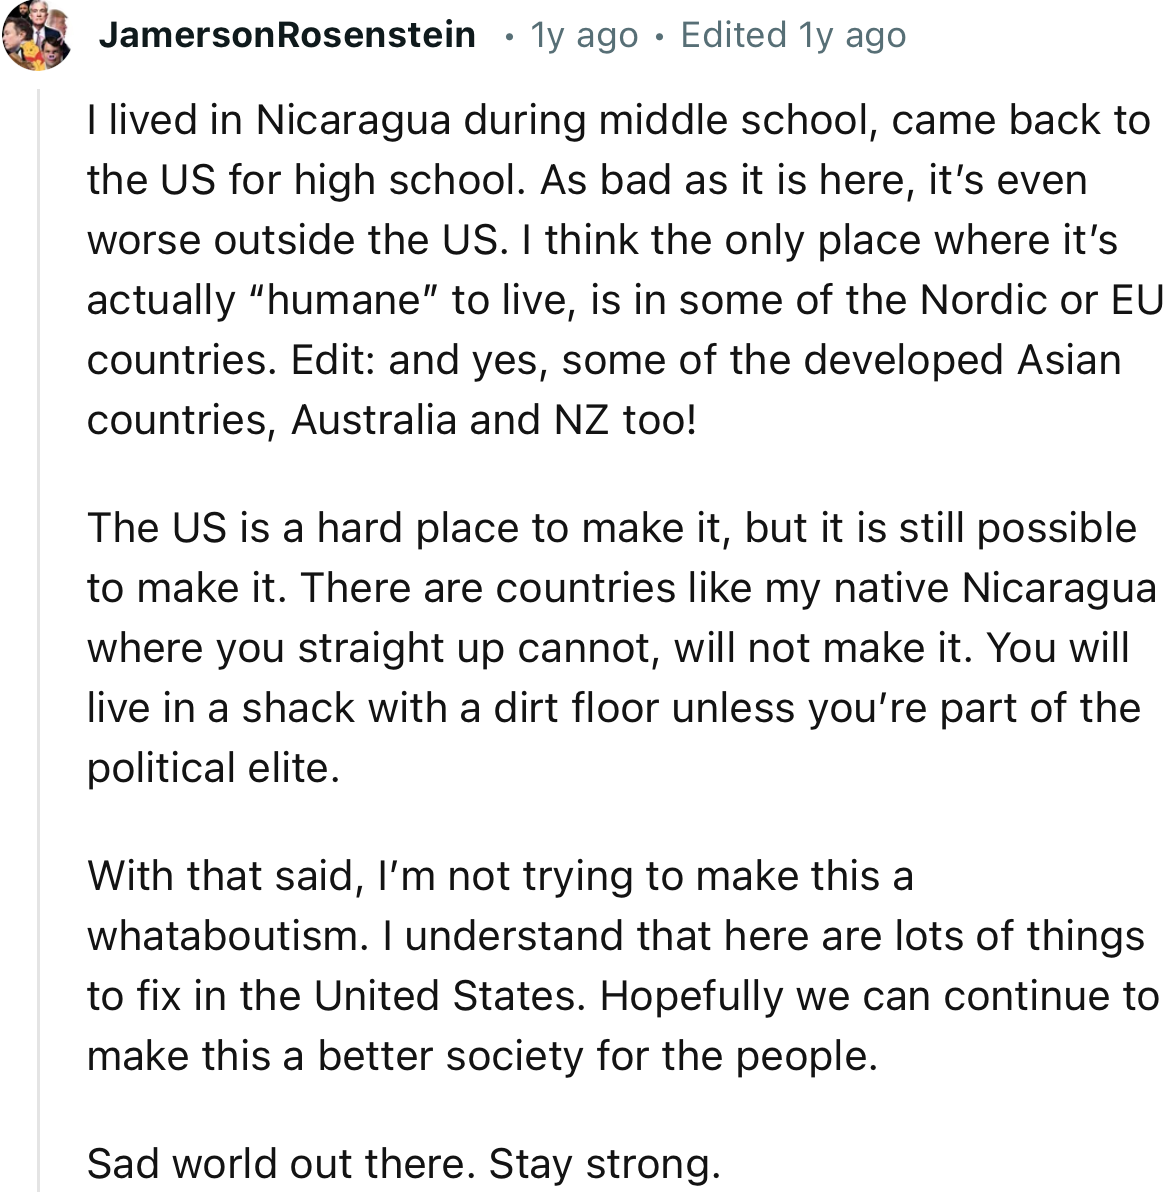 “The US is a hard place to make it, but it is still possible to make it. There are countries like my native Nicaragua where you straight up cannot.”